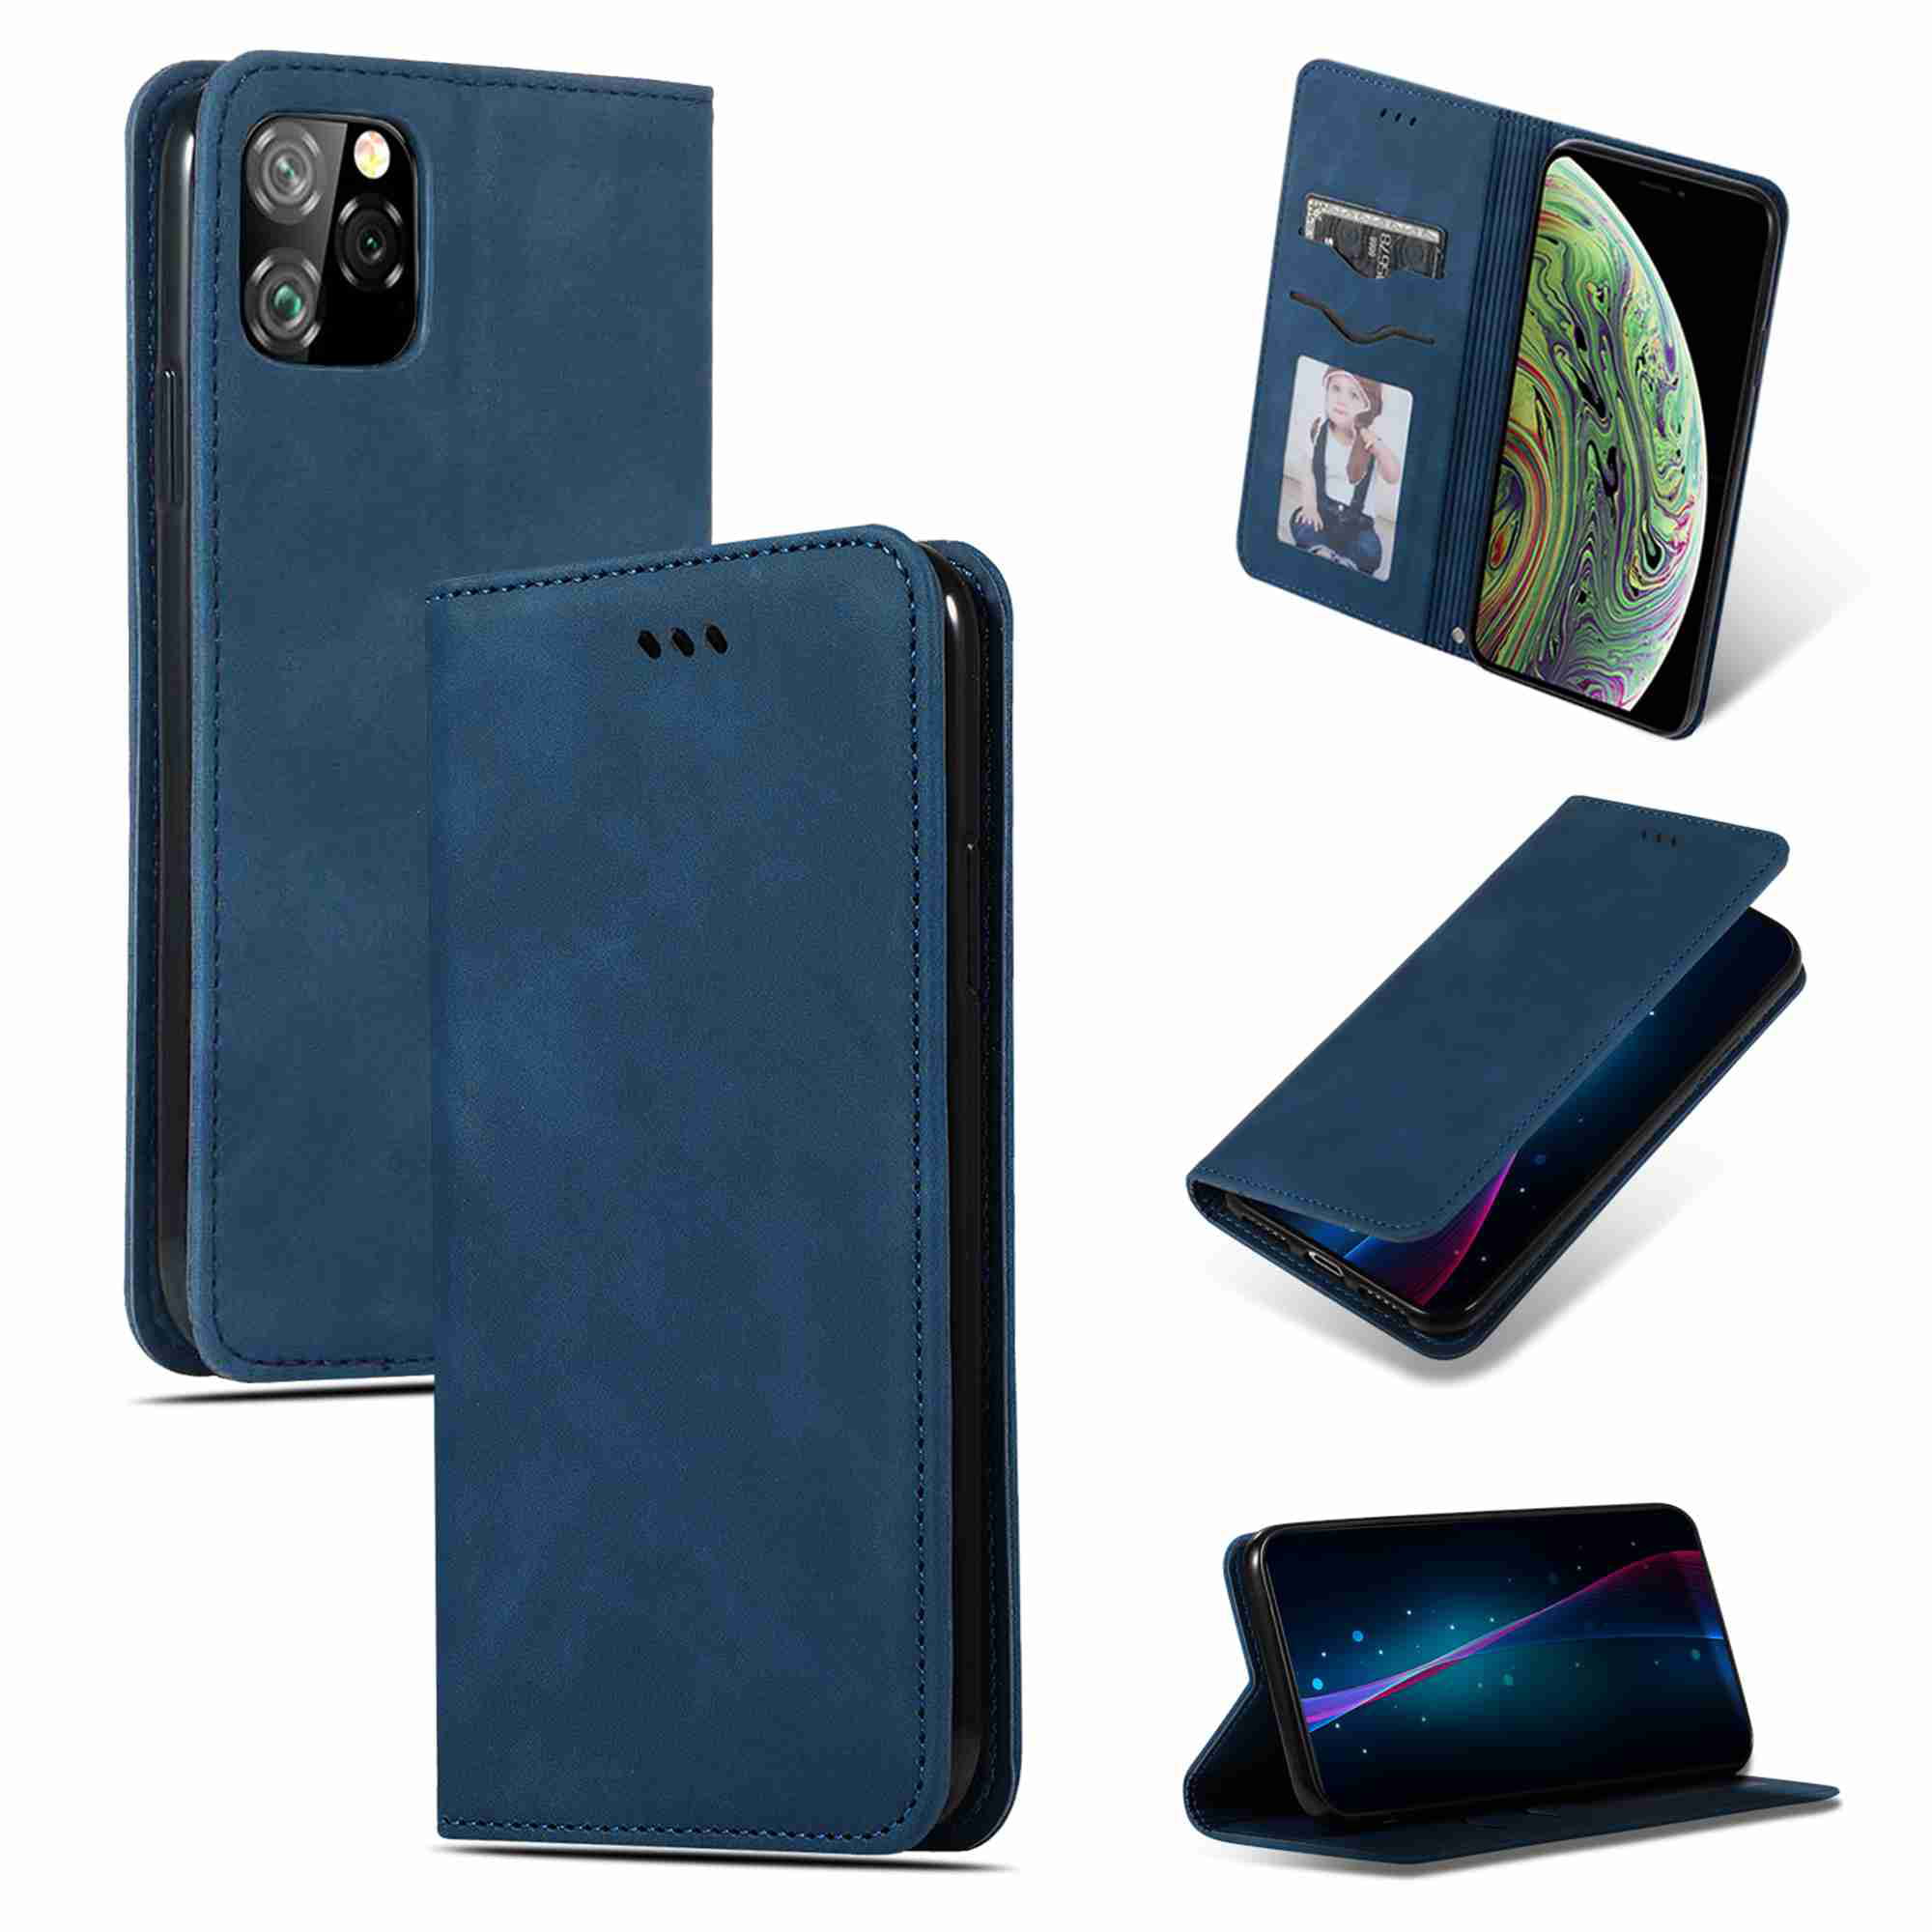 iPhone 11 Pro Flip Case Cover for Leather Card Holders Kickstand Extra-Shockproof Business Cell Phone case Flip Cover 